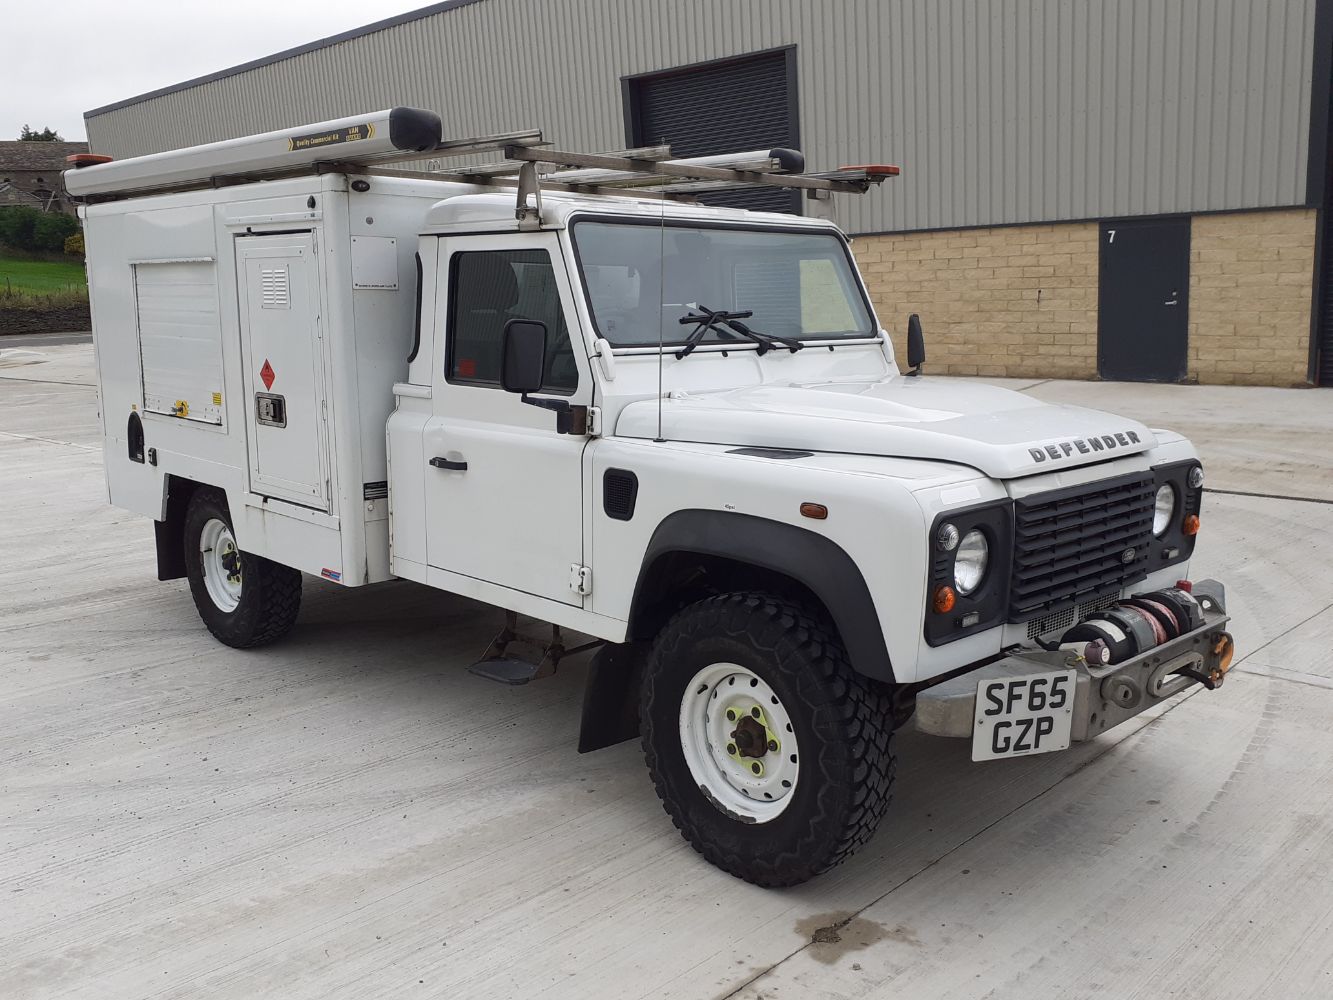 2015 LAND ROVER DEFENDER EXPEDITION VAN, RENAULT MINIBUS, MINIBUS, VANS, HIGH VALUE CARS & 4X4'S ENDS MONDAY FROM 7PM!